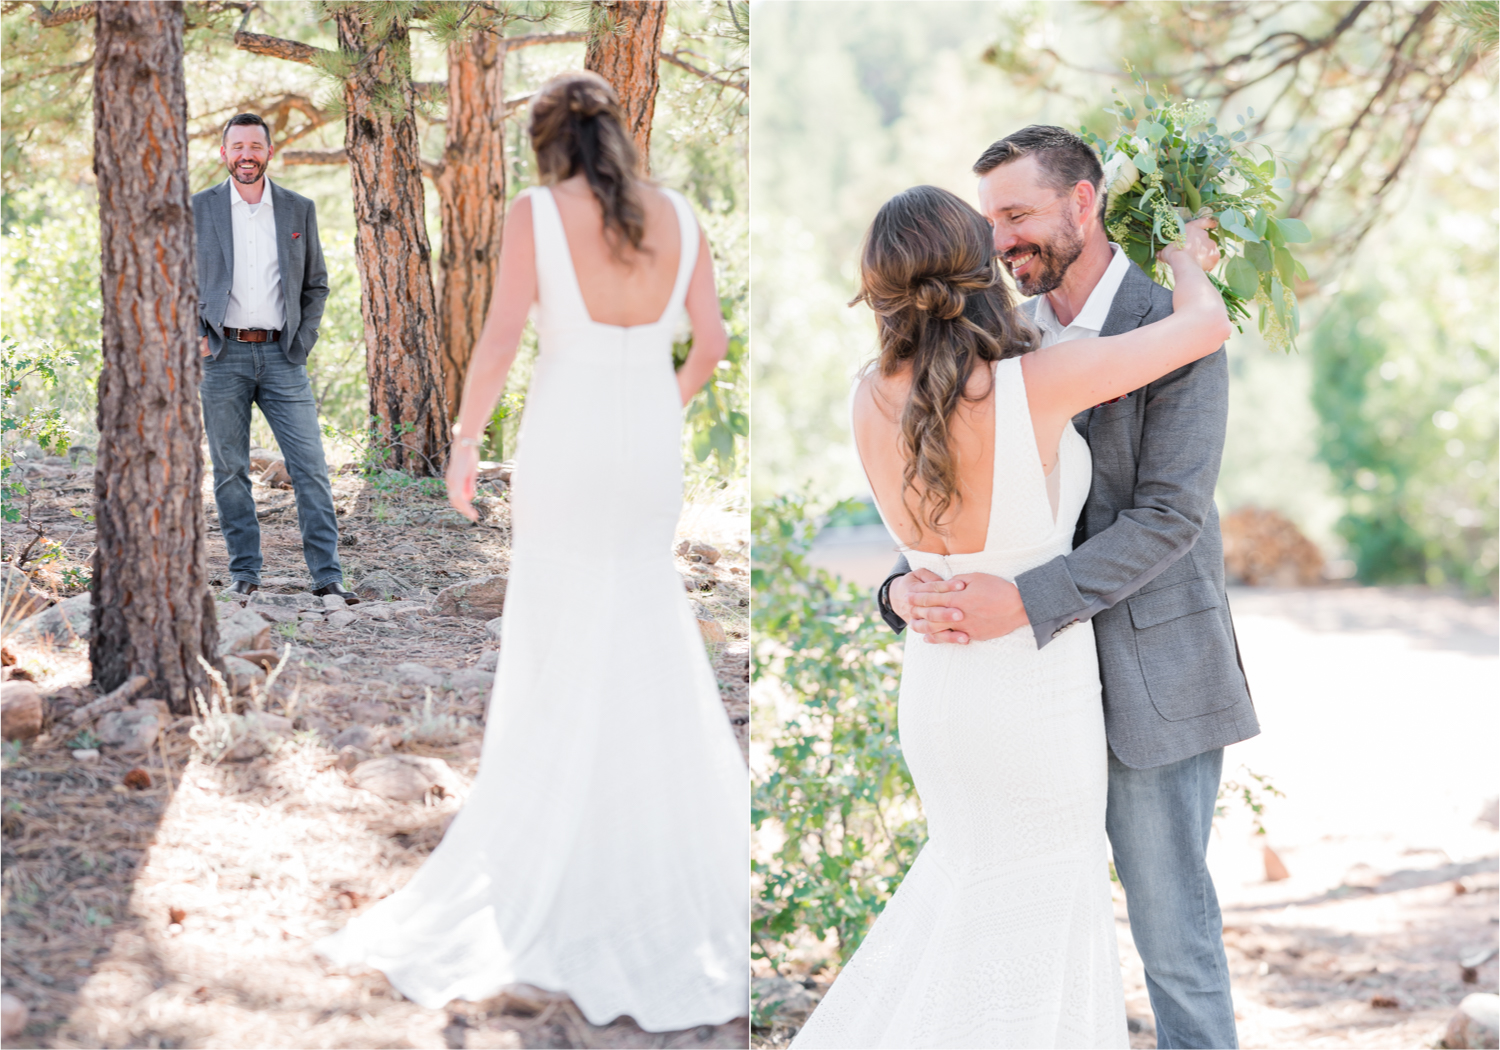 Autumn mountain wedding in Florence Colorado | Britni Girard Photography | Colorado Wedding Photo and Video Team | Mountainside Cabin for intimate wedding with rustic farm-tables and romantic details | Wedding Colors White, Dusty Rose and Sage | Florals by Skyway Creations  | Bride and Groom Portraits in the Mountains | First Look